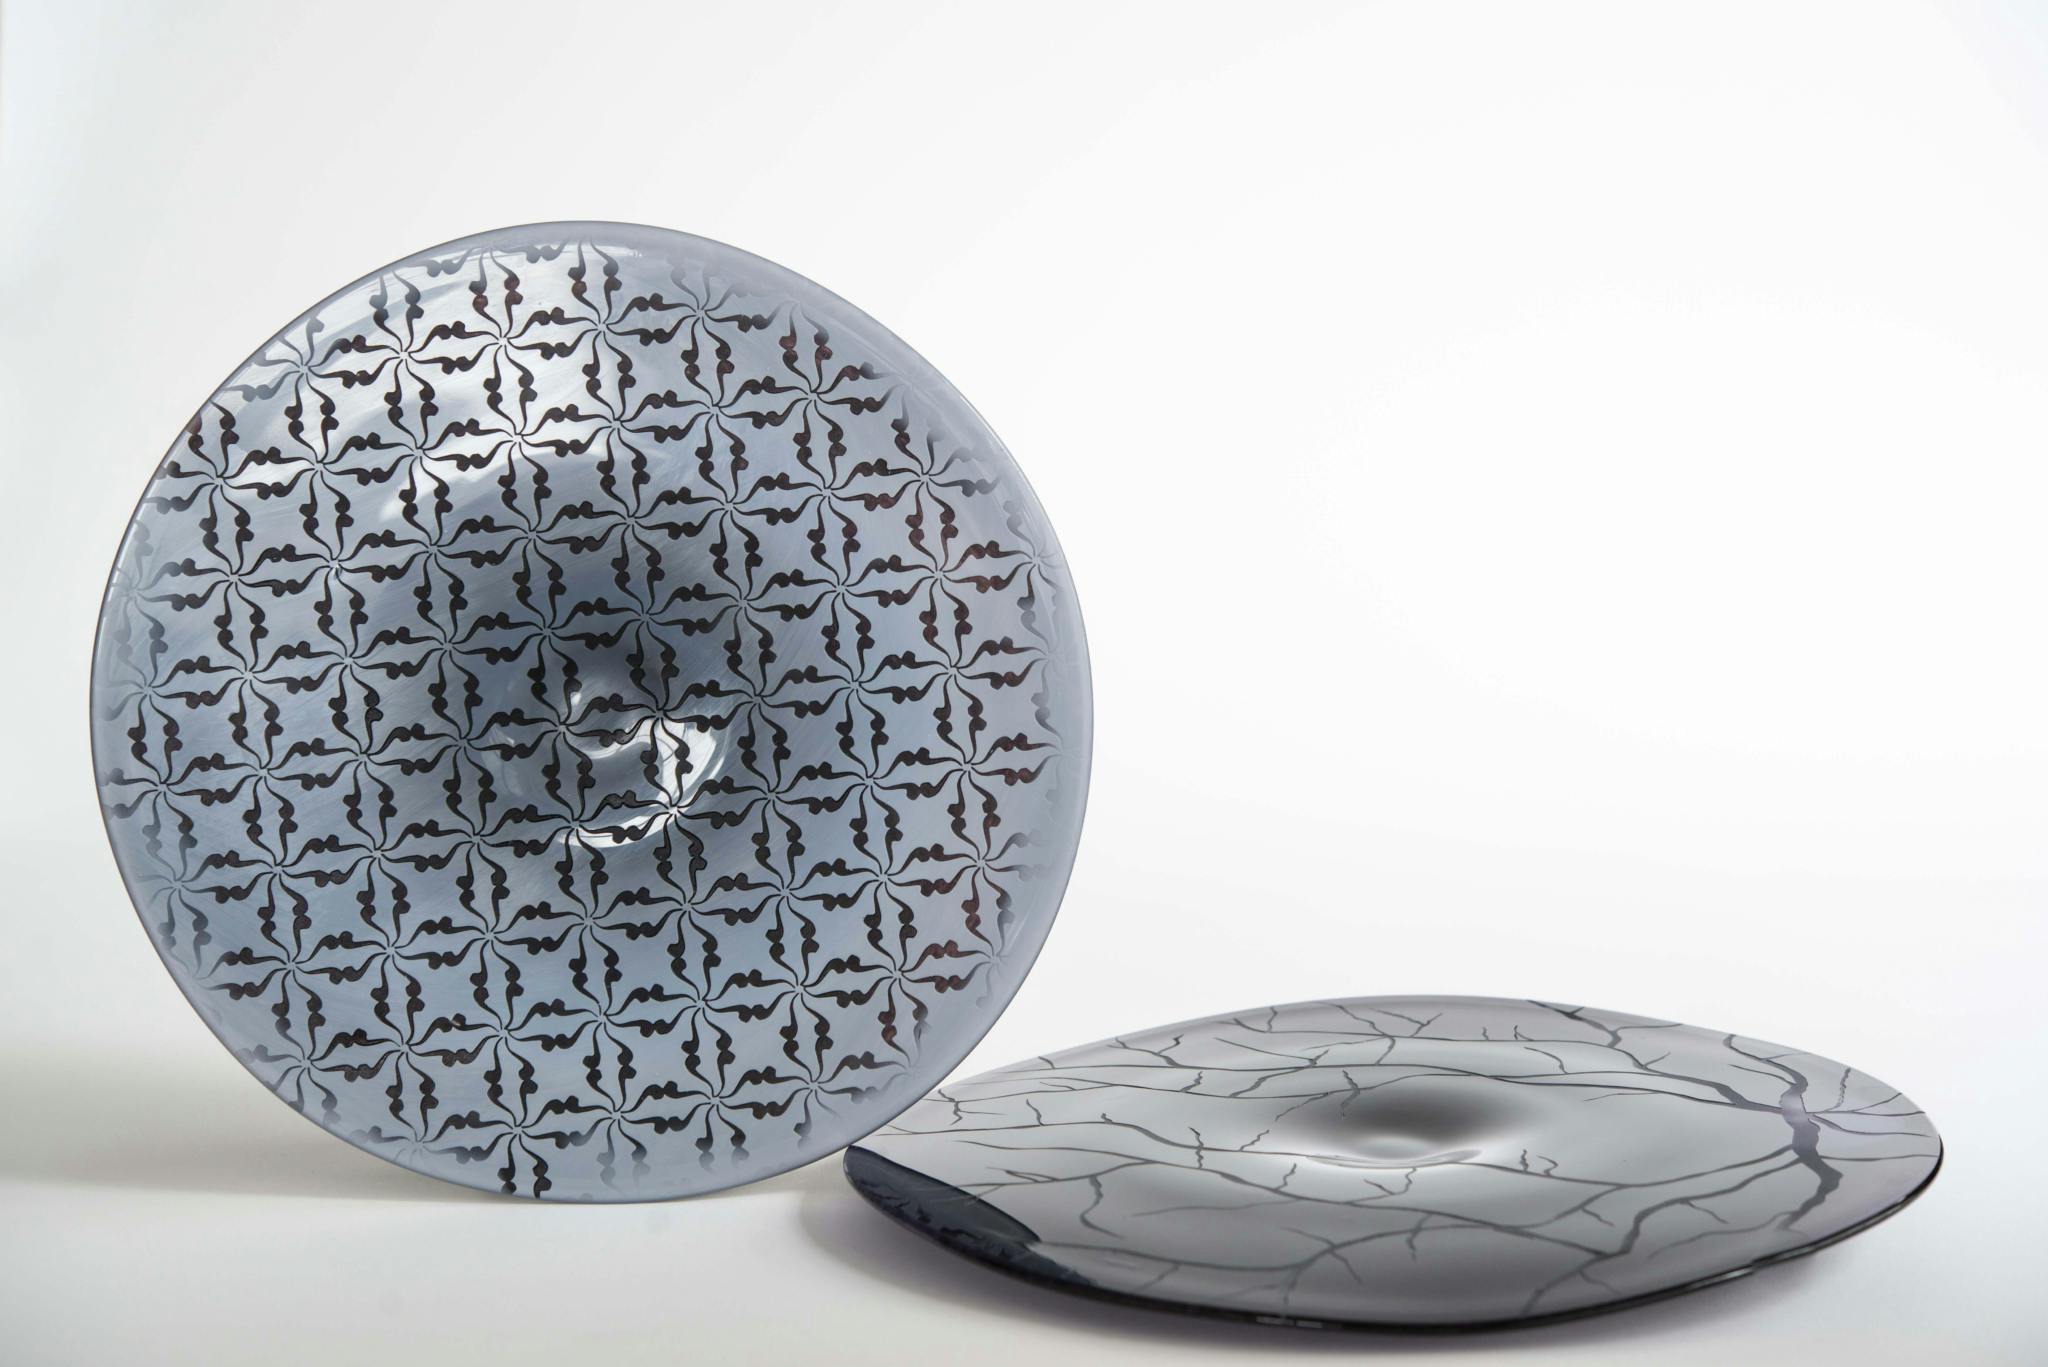 Image shows two glass discs in shades of bluey grey, one flat on the surface, another on its edge, with etchings and patterns